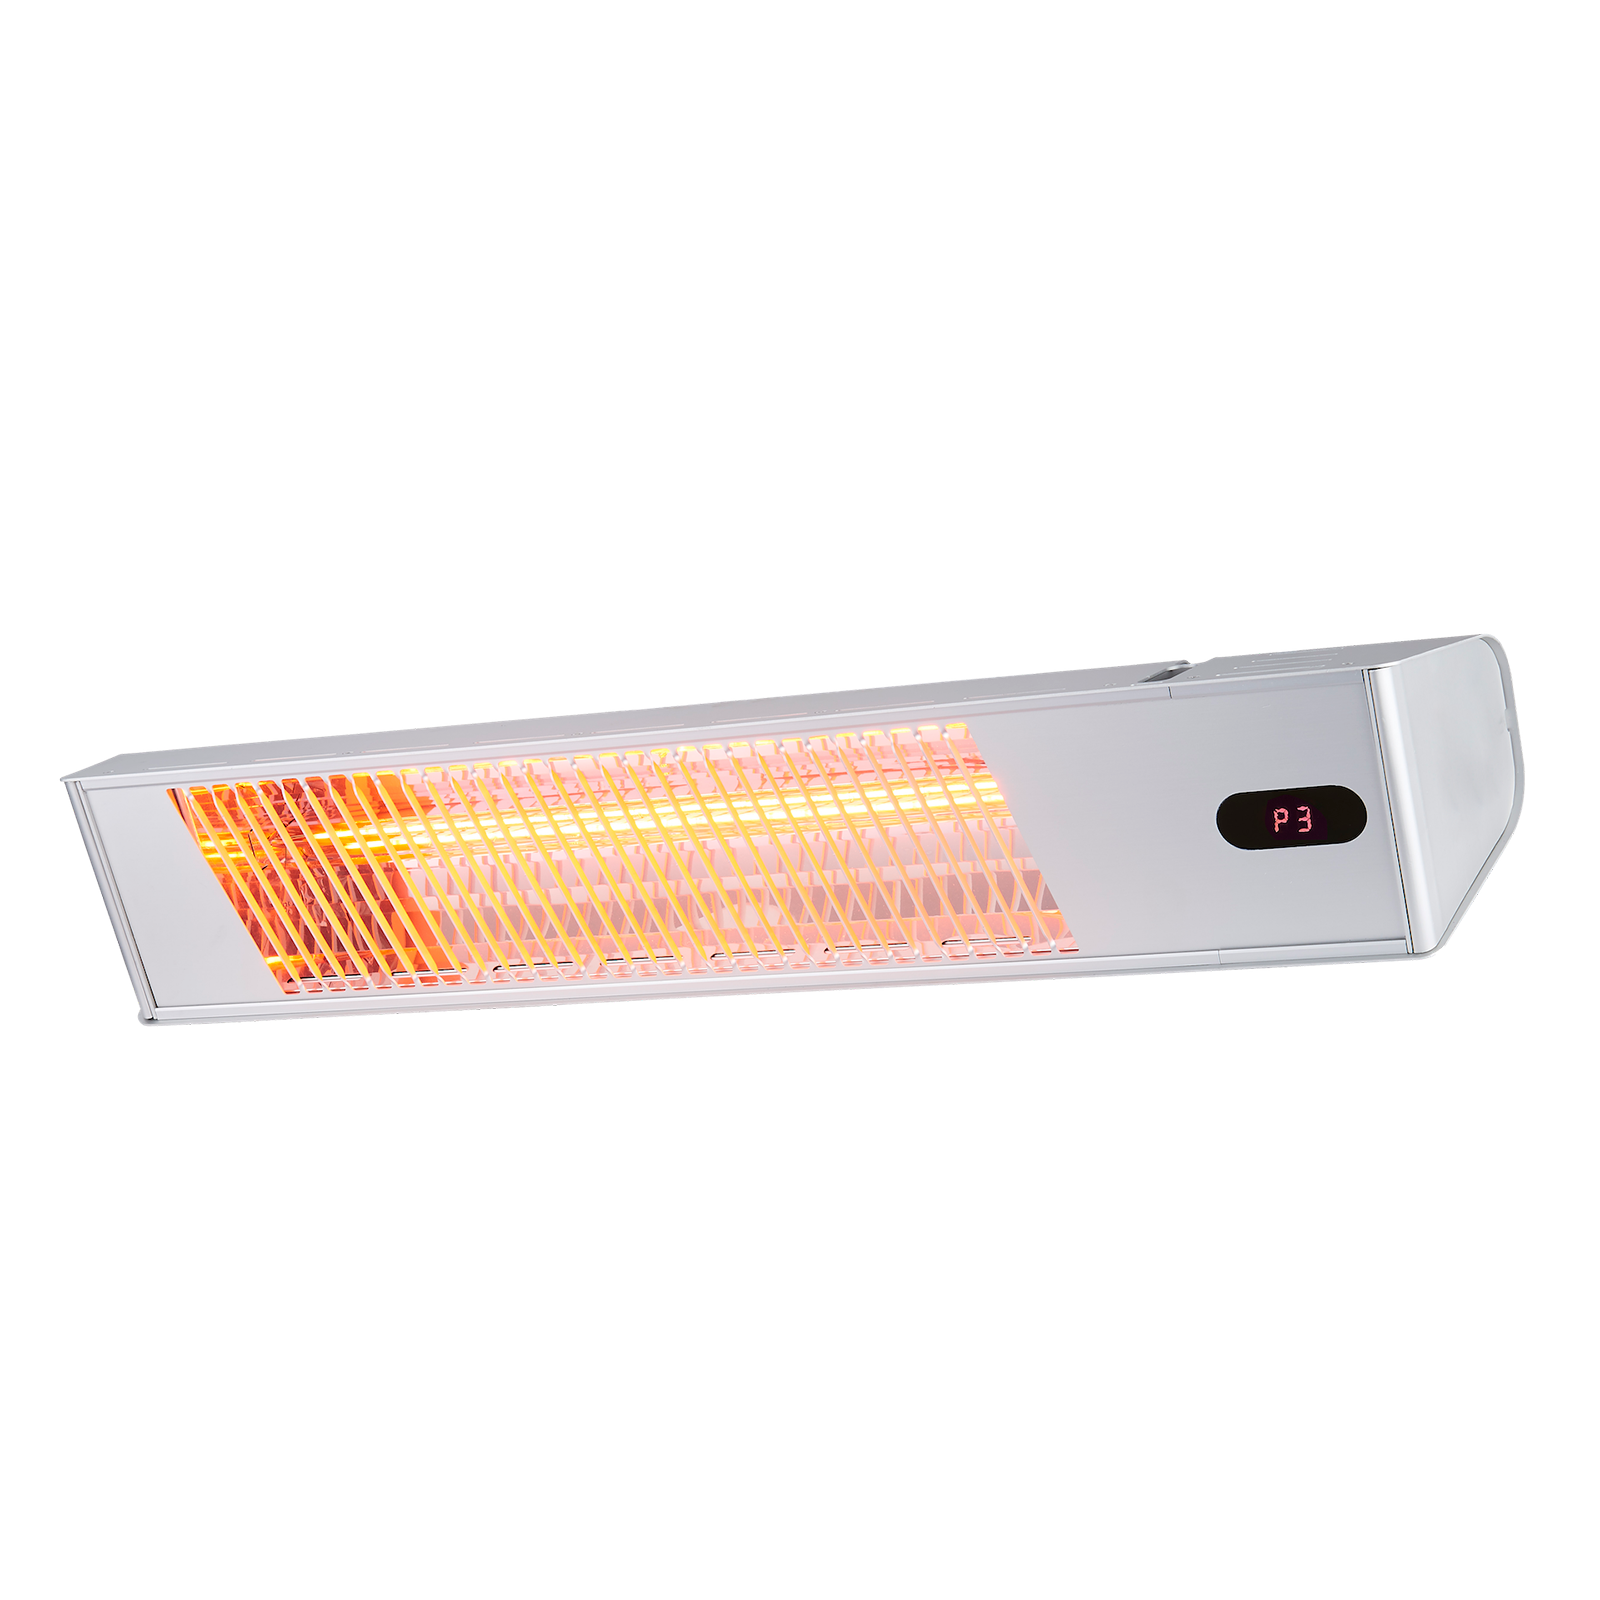 Excelair Low Glow Halogen Wall / Ceiling Mounted Electric Heater